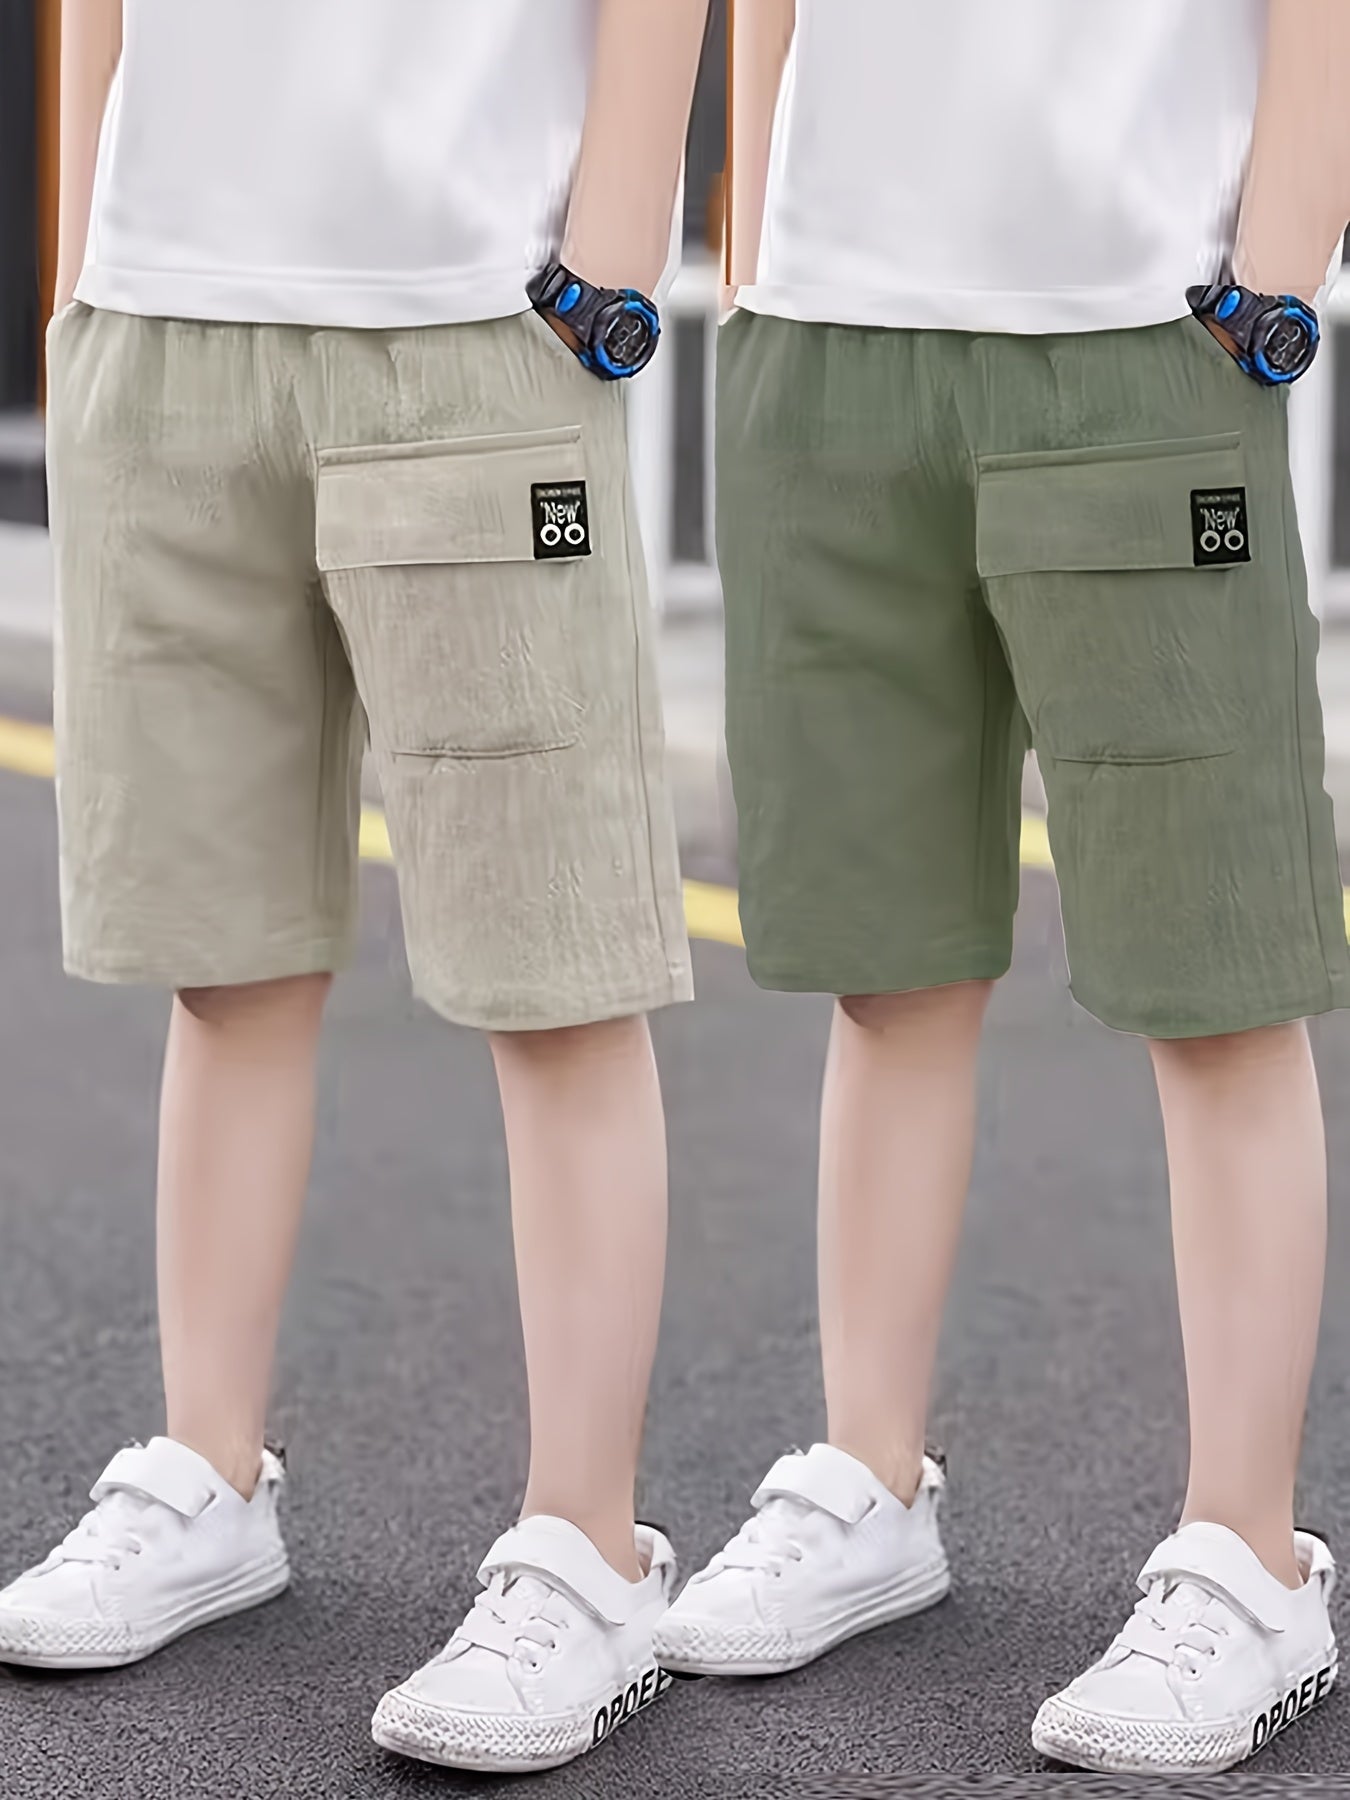 2pcs Boys Ultra - Soft Elastic Waist Solid Cotton Shorts - Trendy & Comfortable, Creative Design for Summer Outdoor Adventures - Ammpoure Wellbeing